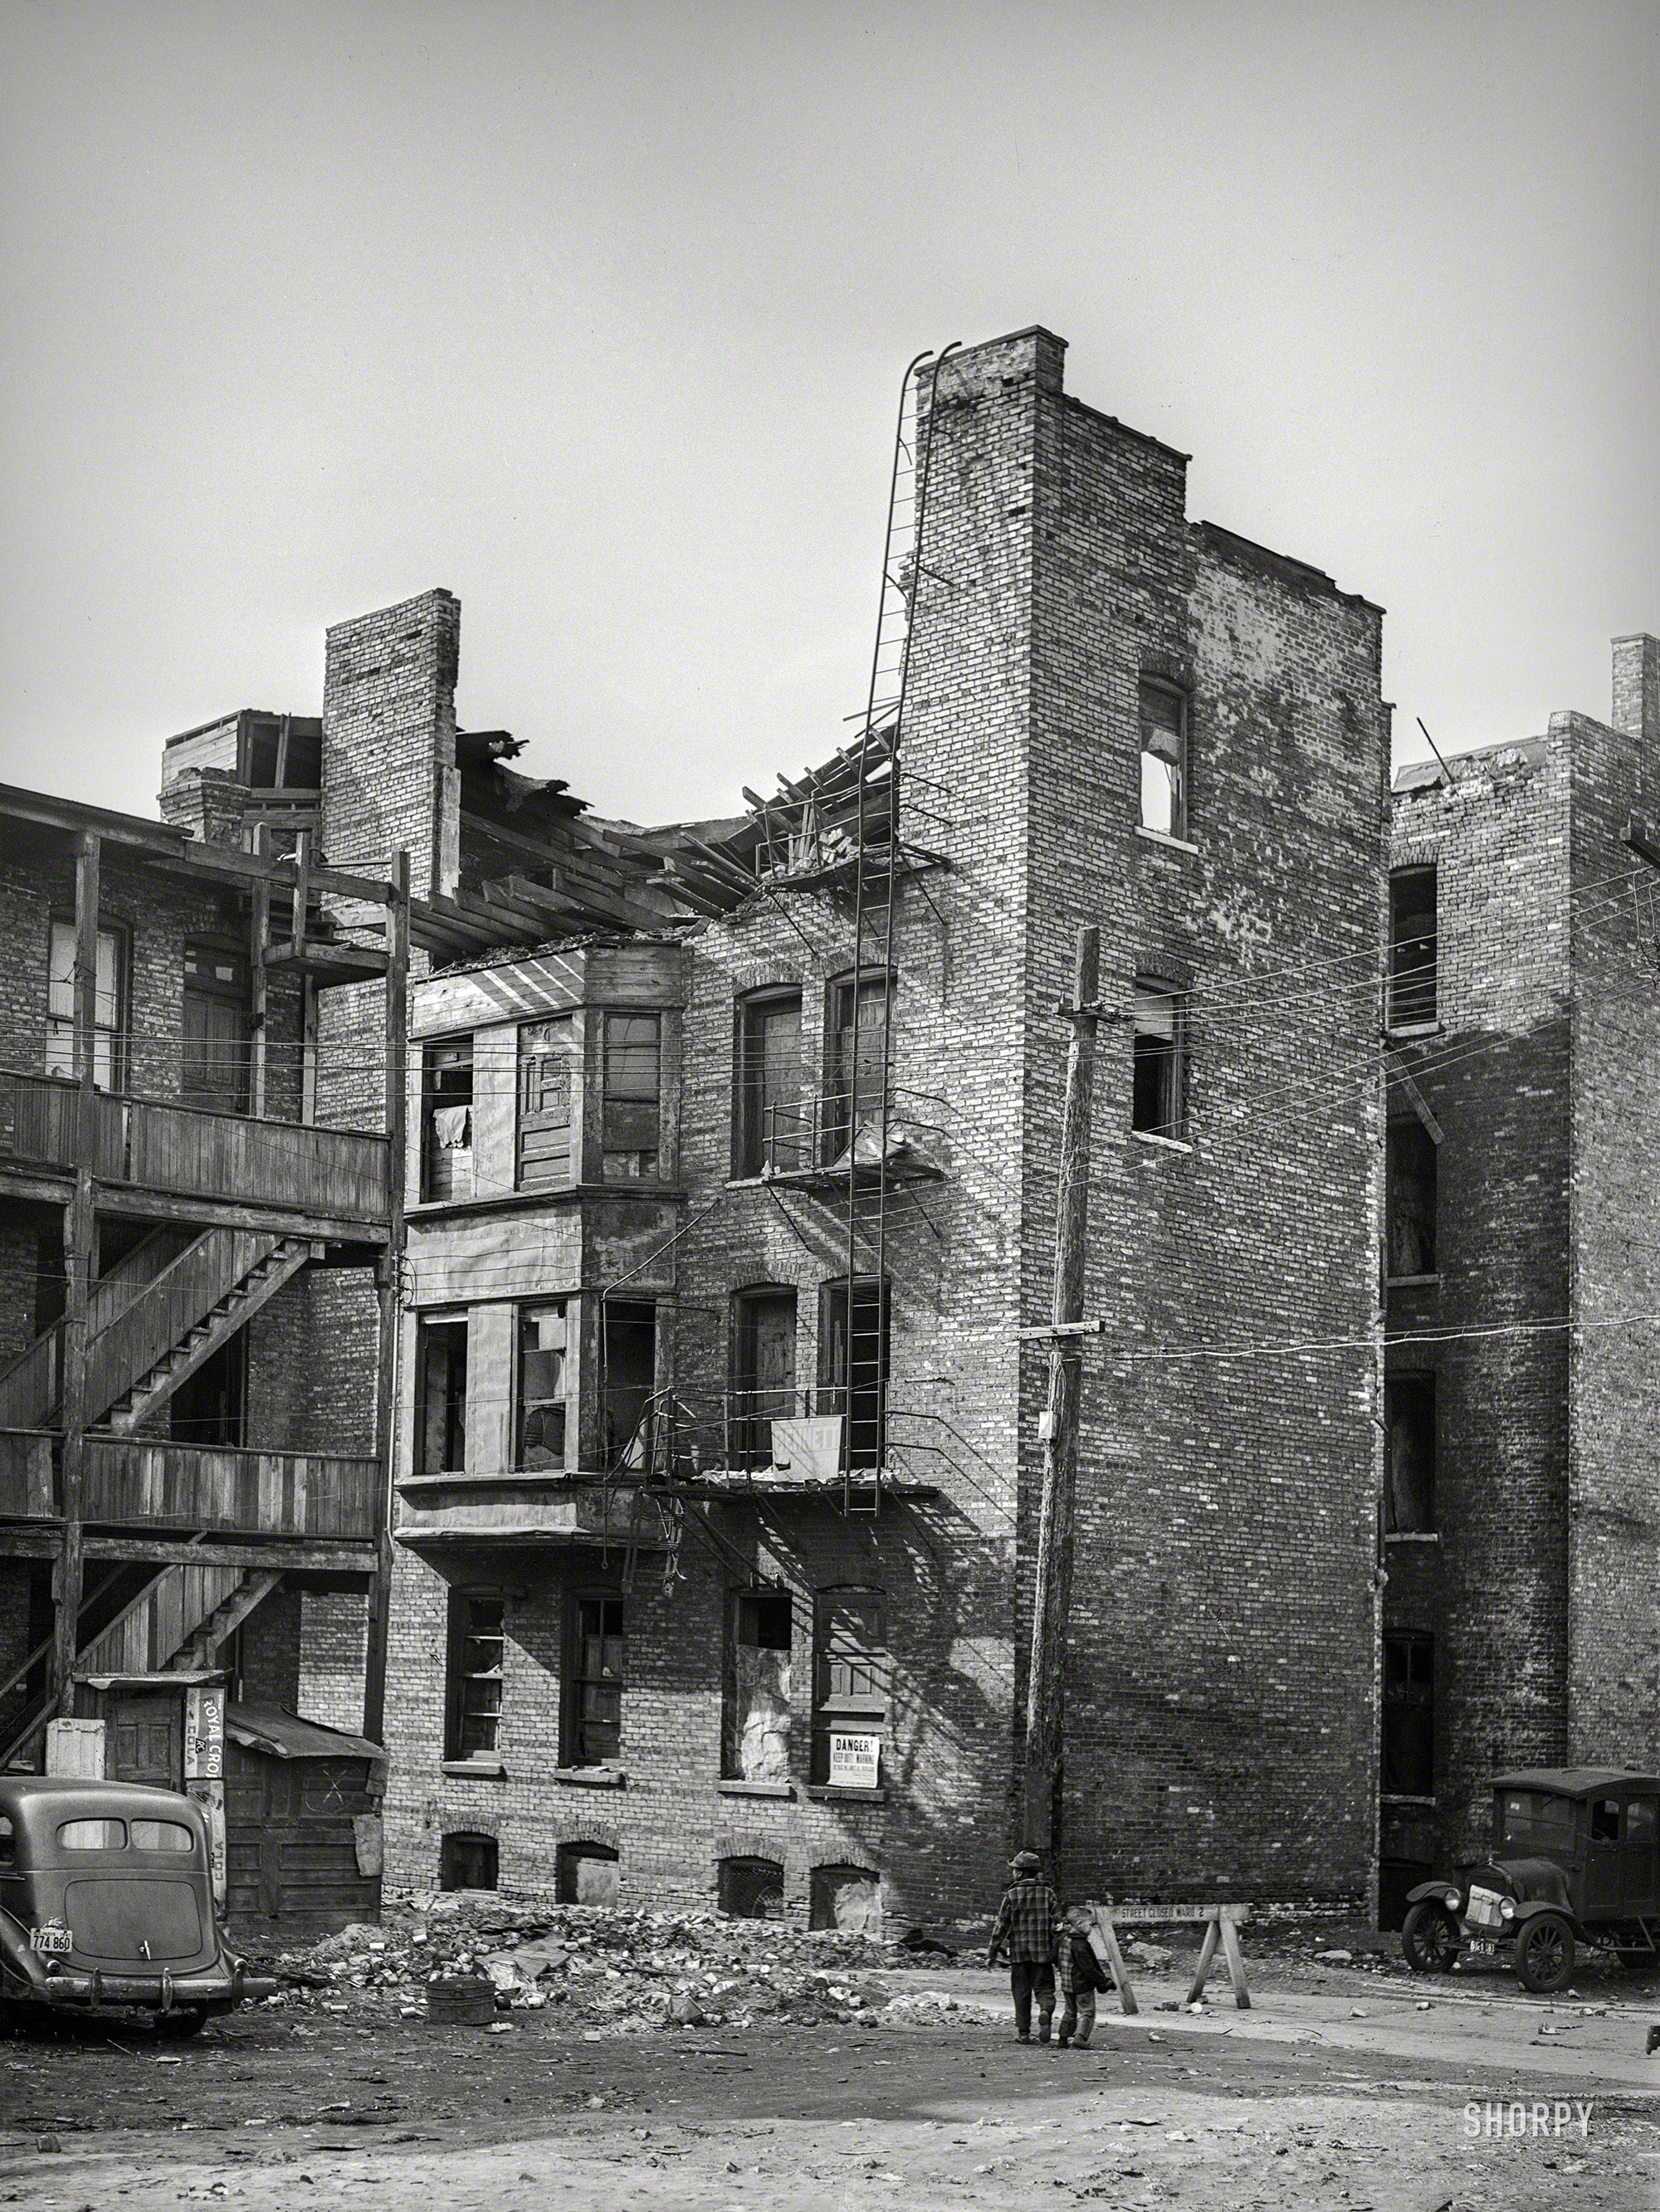 April 1941. Chicago. "Children playing next to condemned building in the 'black belt,' Negro section on the South Side." Photo by Russell Lee. View full size.